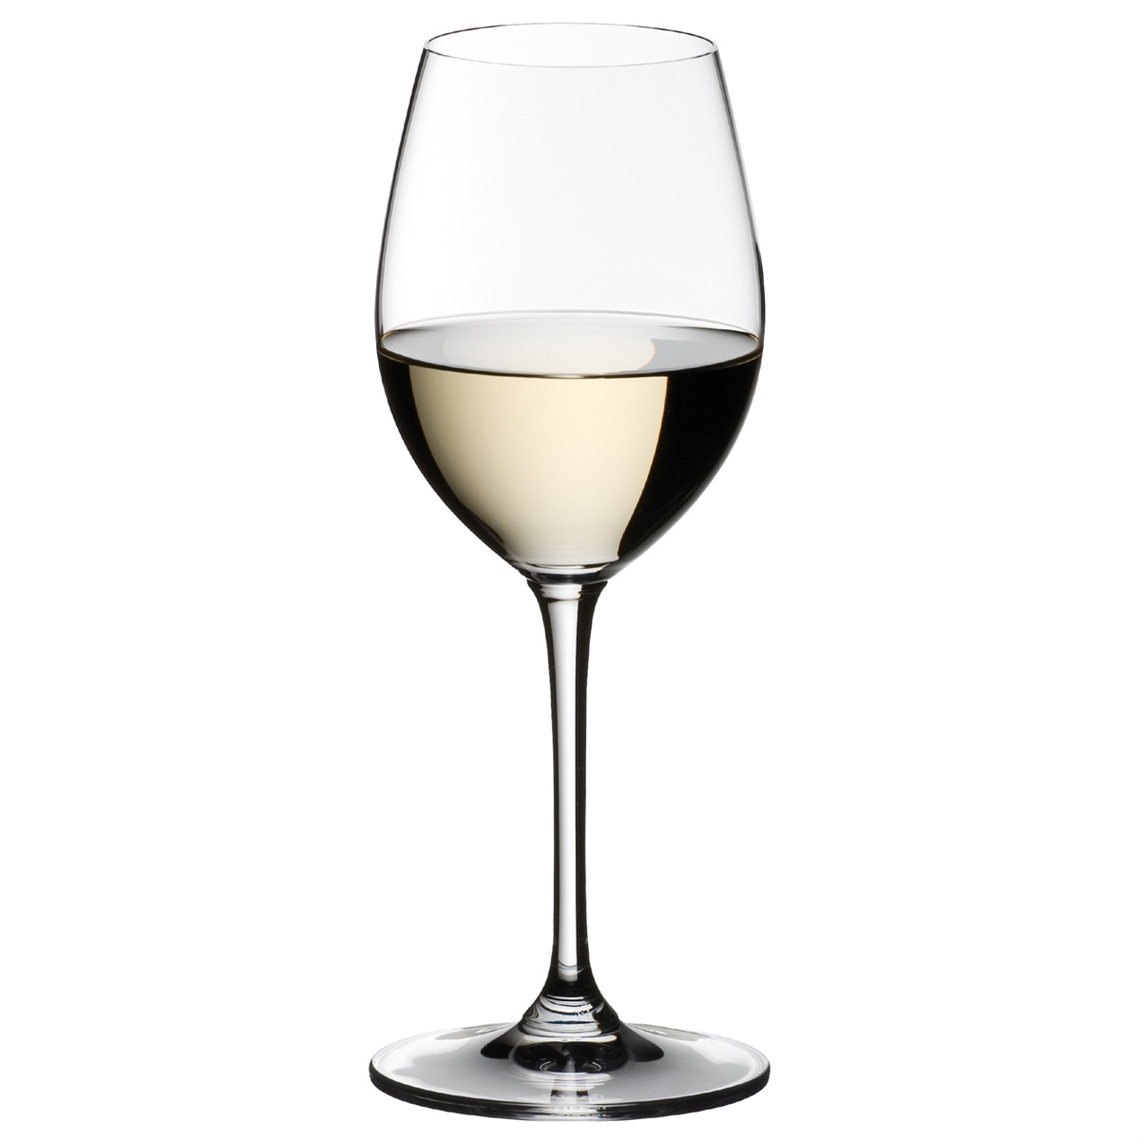 View more exquisit from our Dessert Wine Glasses range